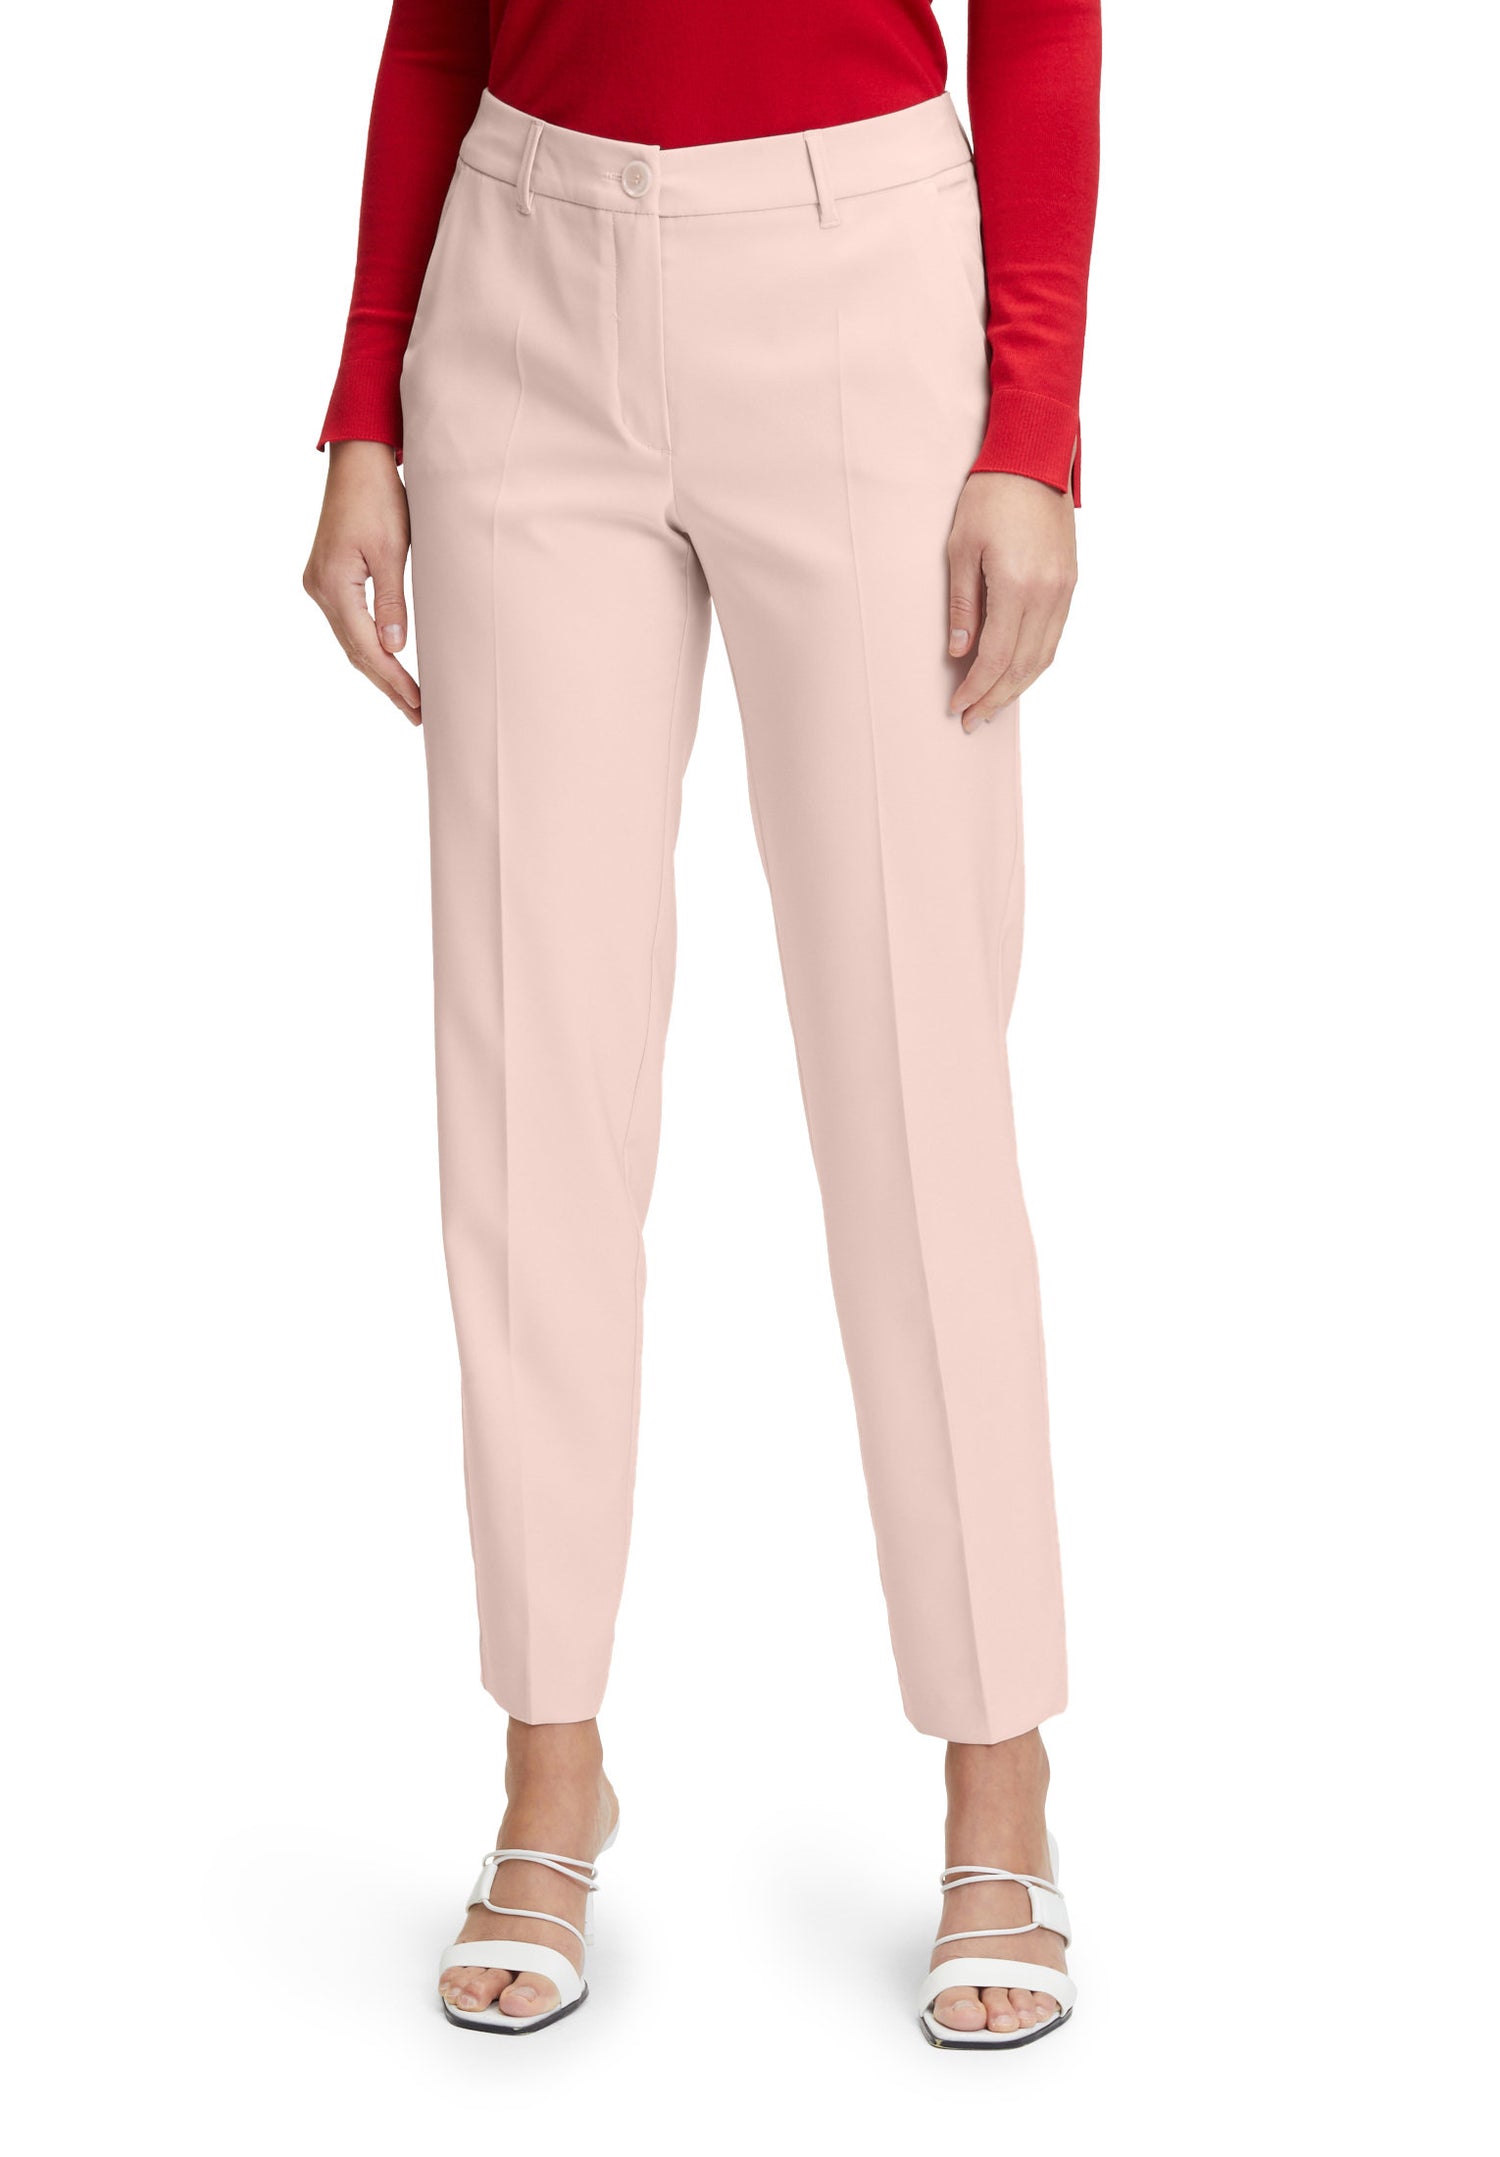 Business Trousers
With Crease_6002-1080_6055_05